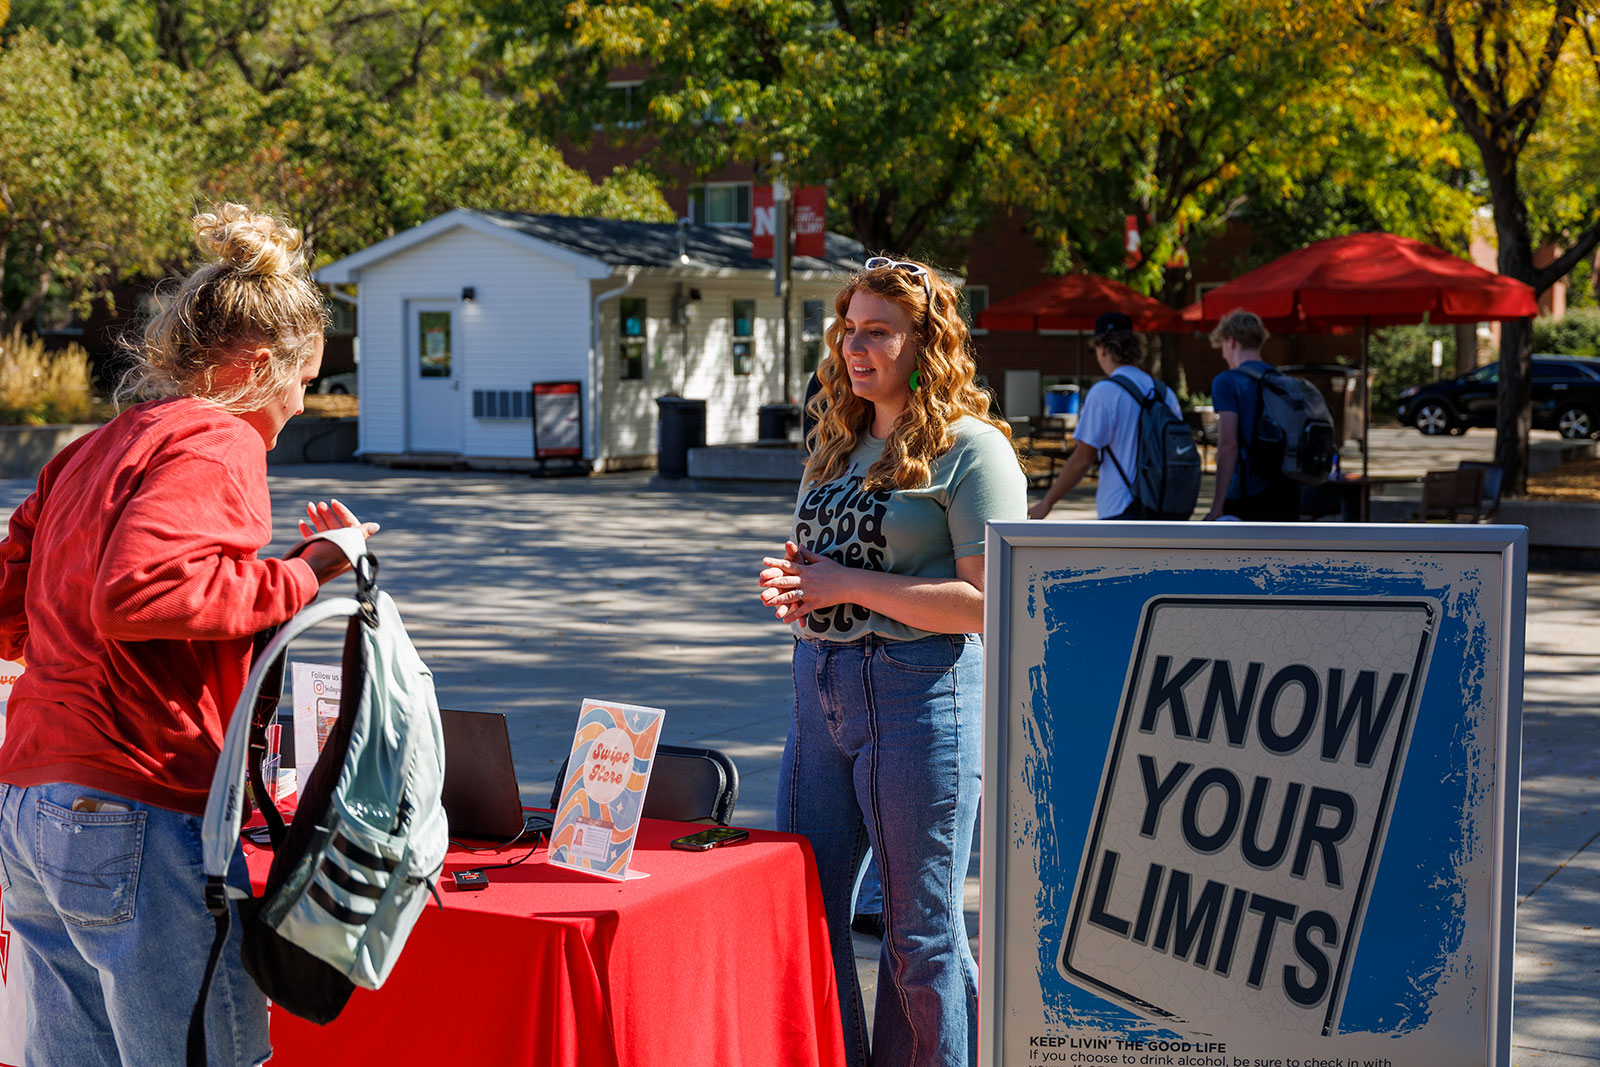 Staff offer alcohol education at tabling event on campus